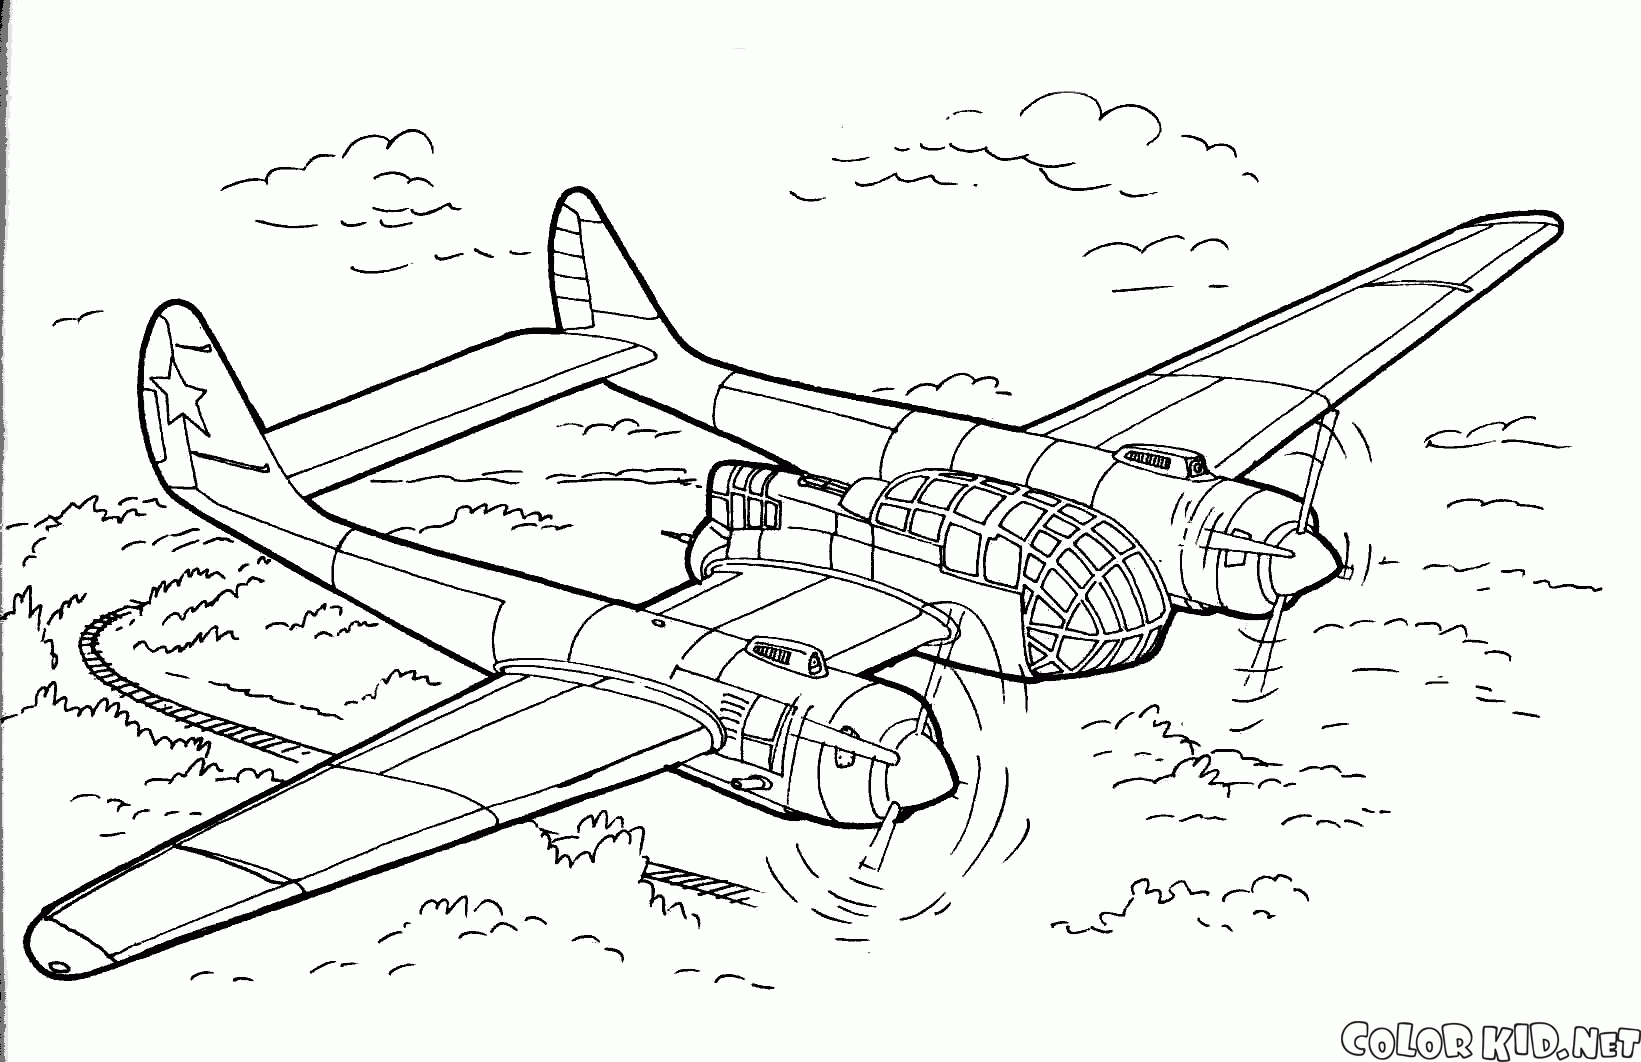 Coloring page - Planes and helicopters